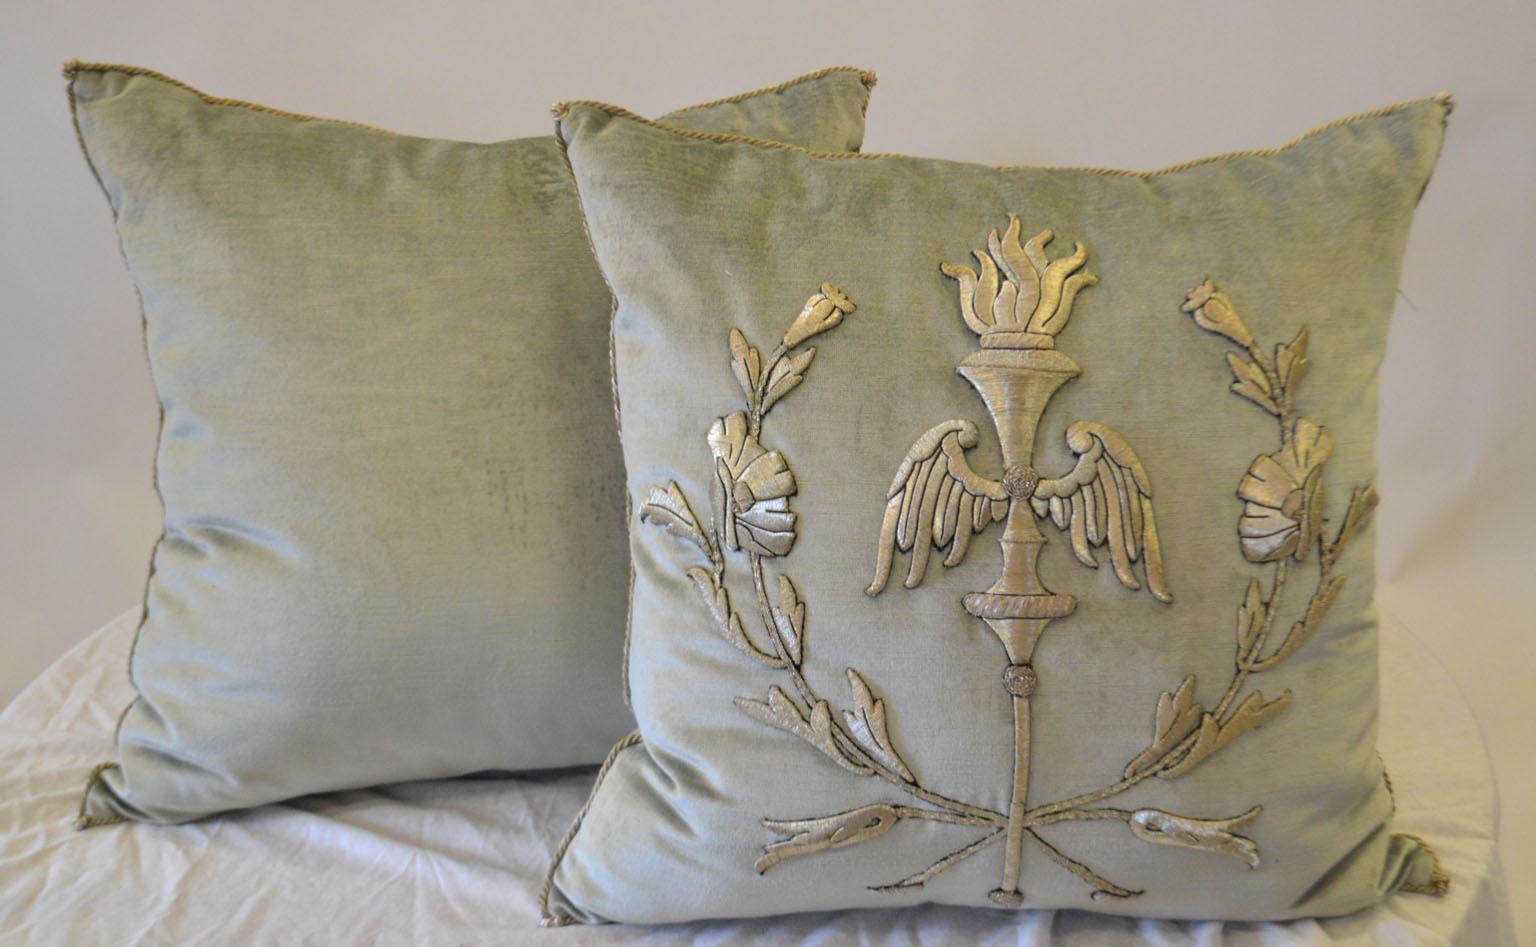 North American Pair of Embroidery Pillows, Antique trim